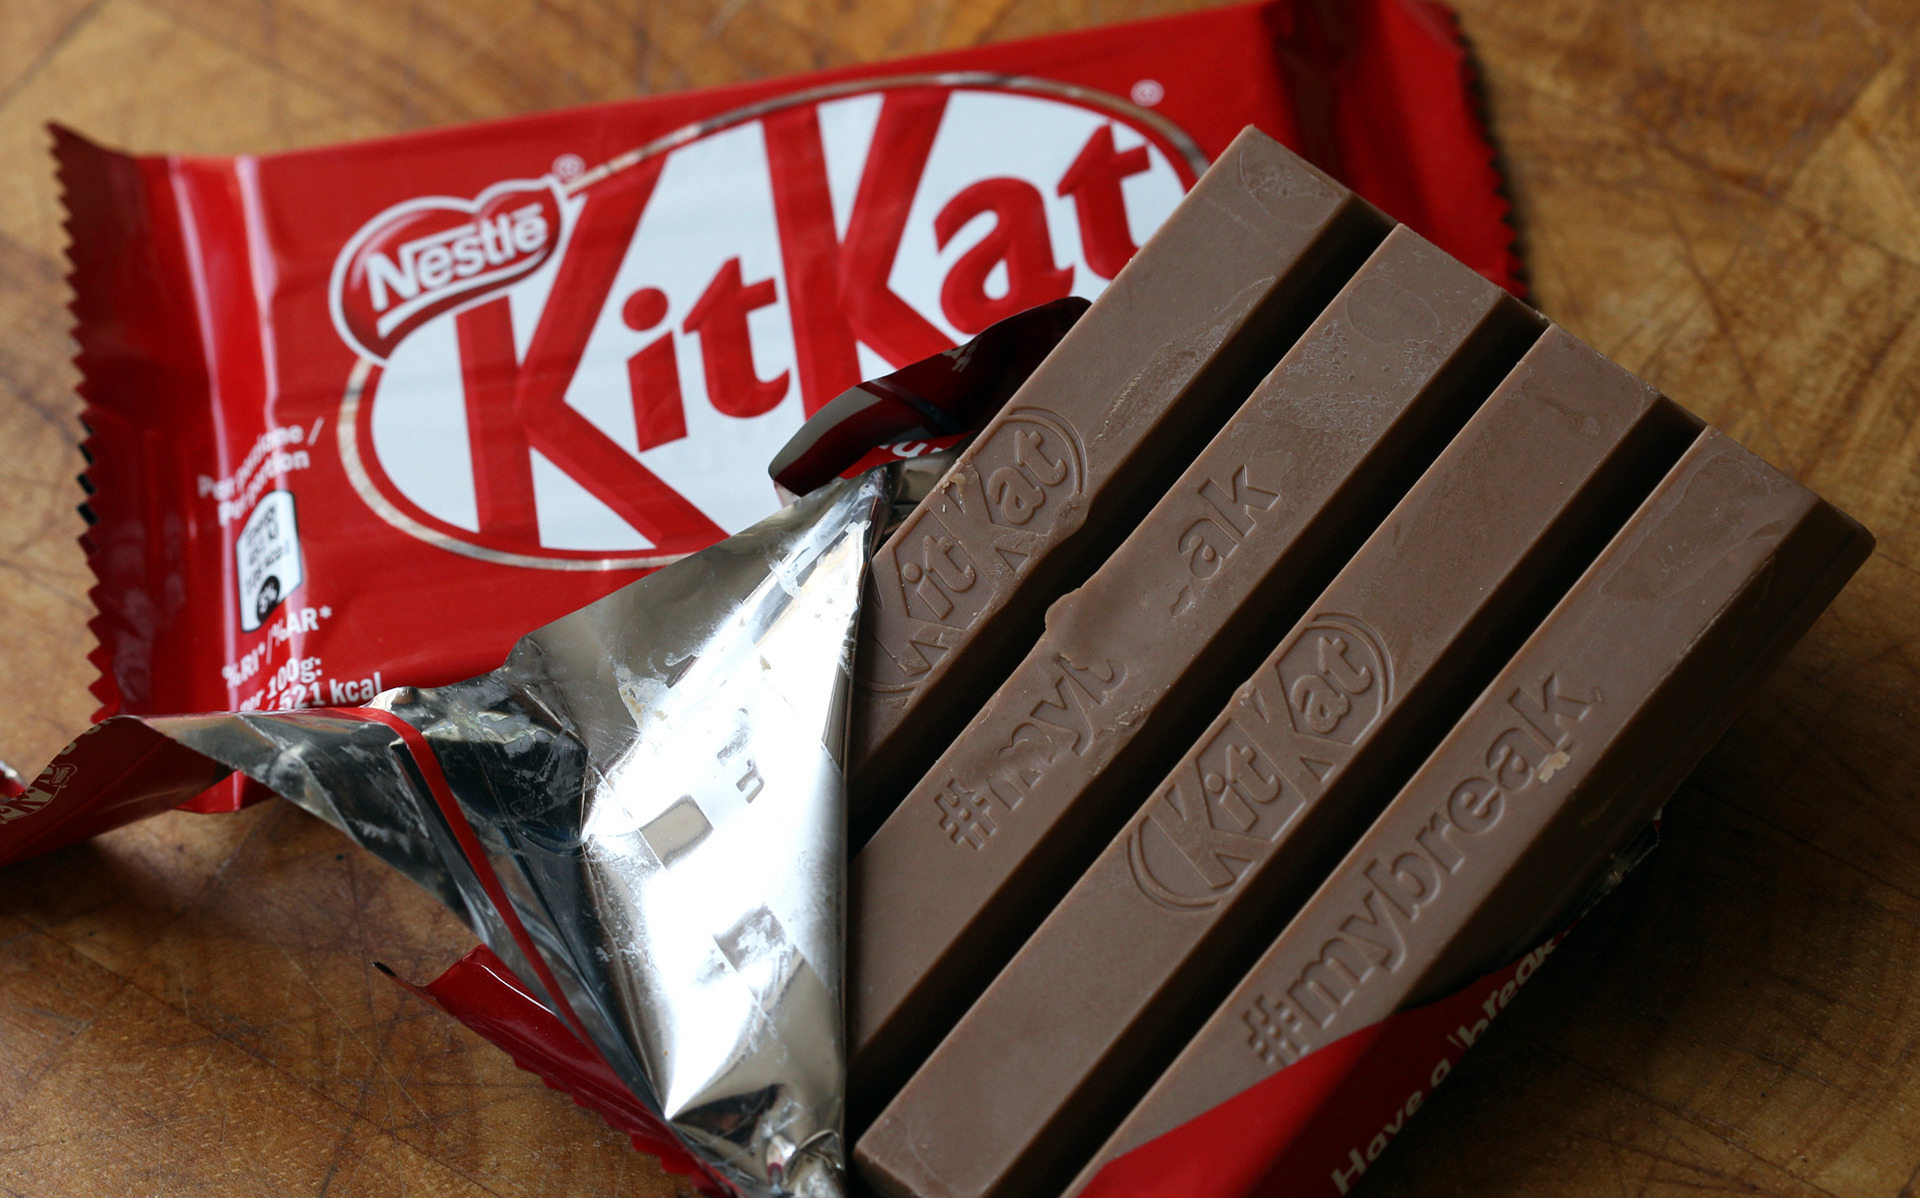 How the KitKat went global